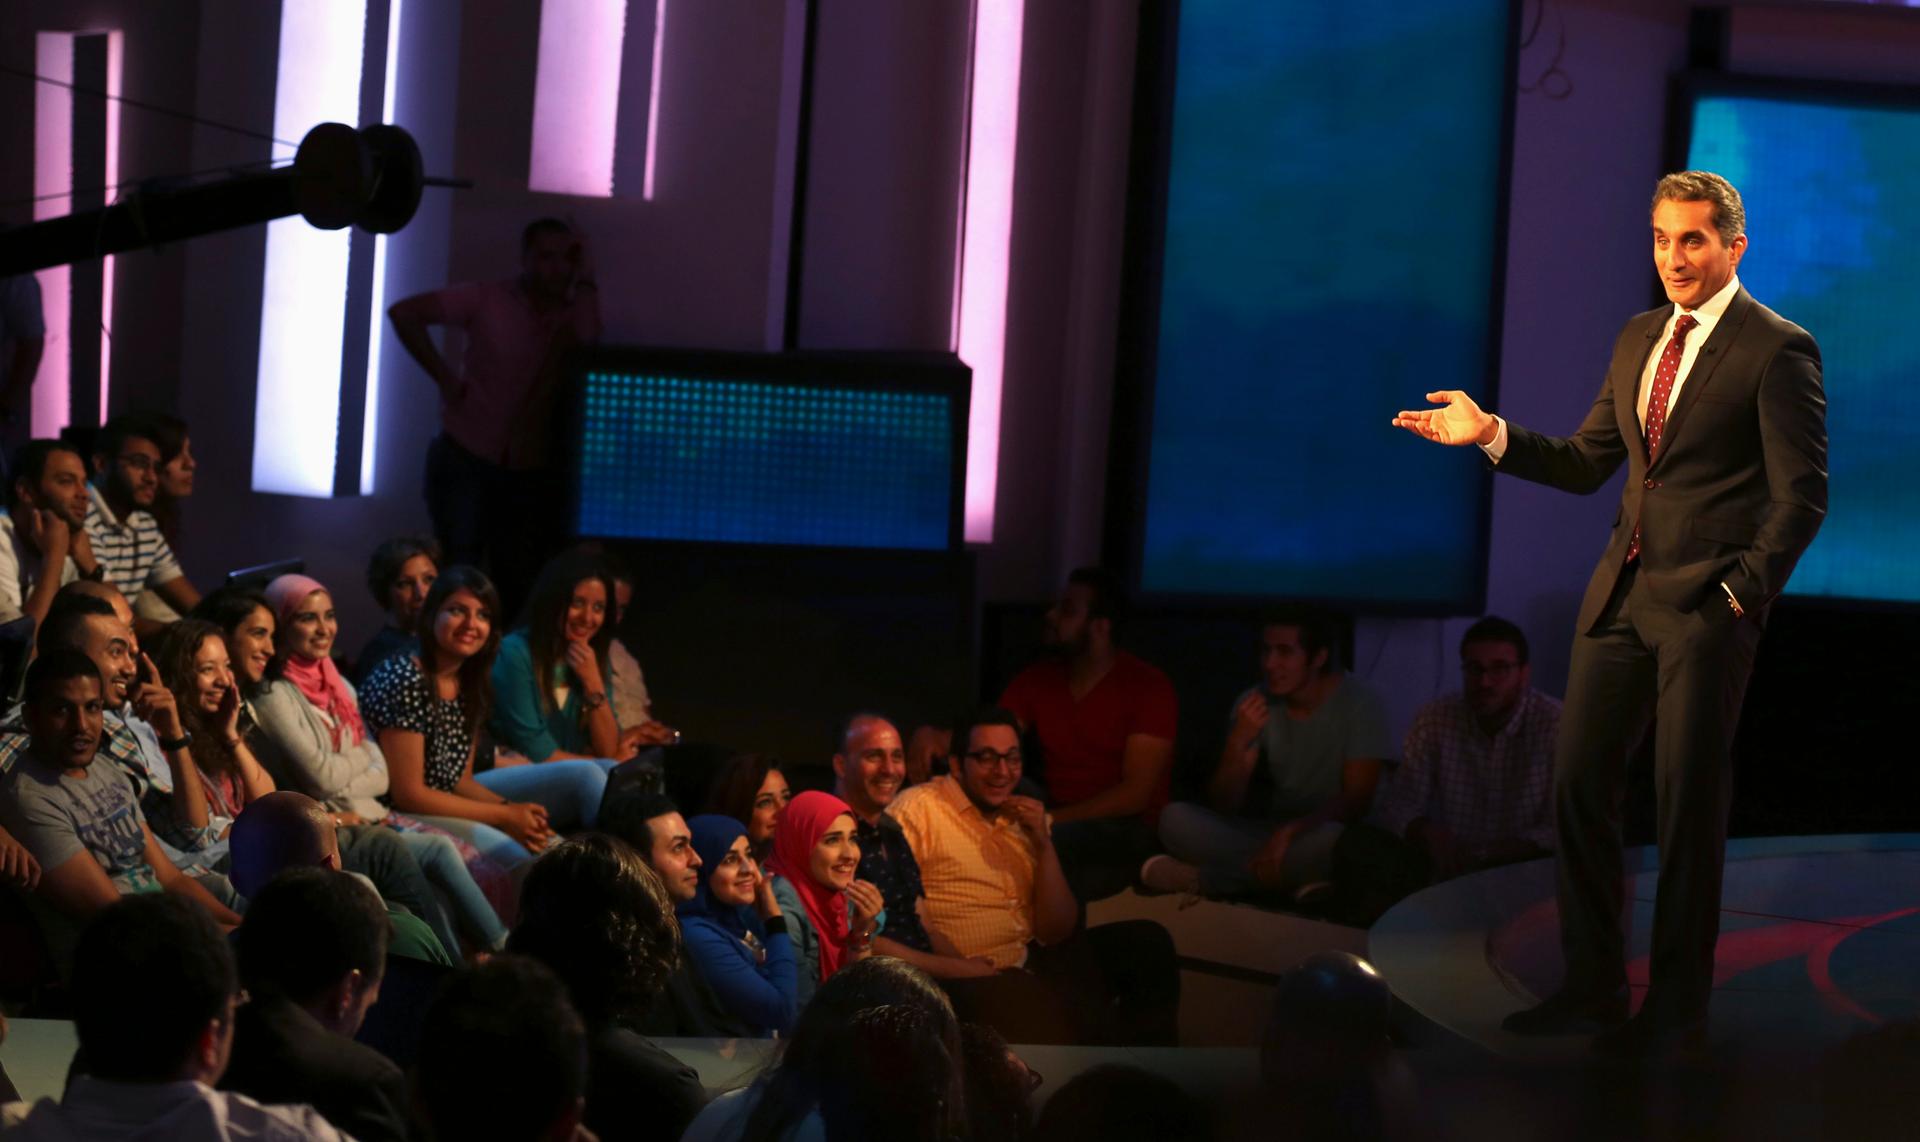 Egypt's TV satirist, Bassem Youssef, said his show had been cancelled amid speculation it was because his latest script poked fun at a presidential election won by the former army chief .Bassem Youssef is often referred to as the "Egyptian Jon Stewart."